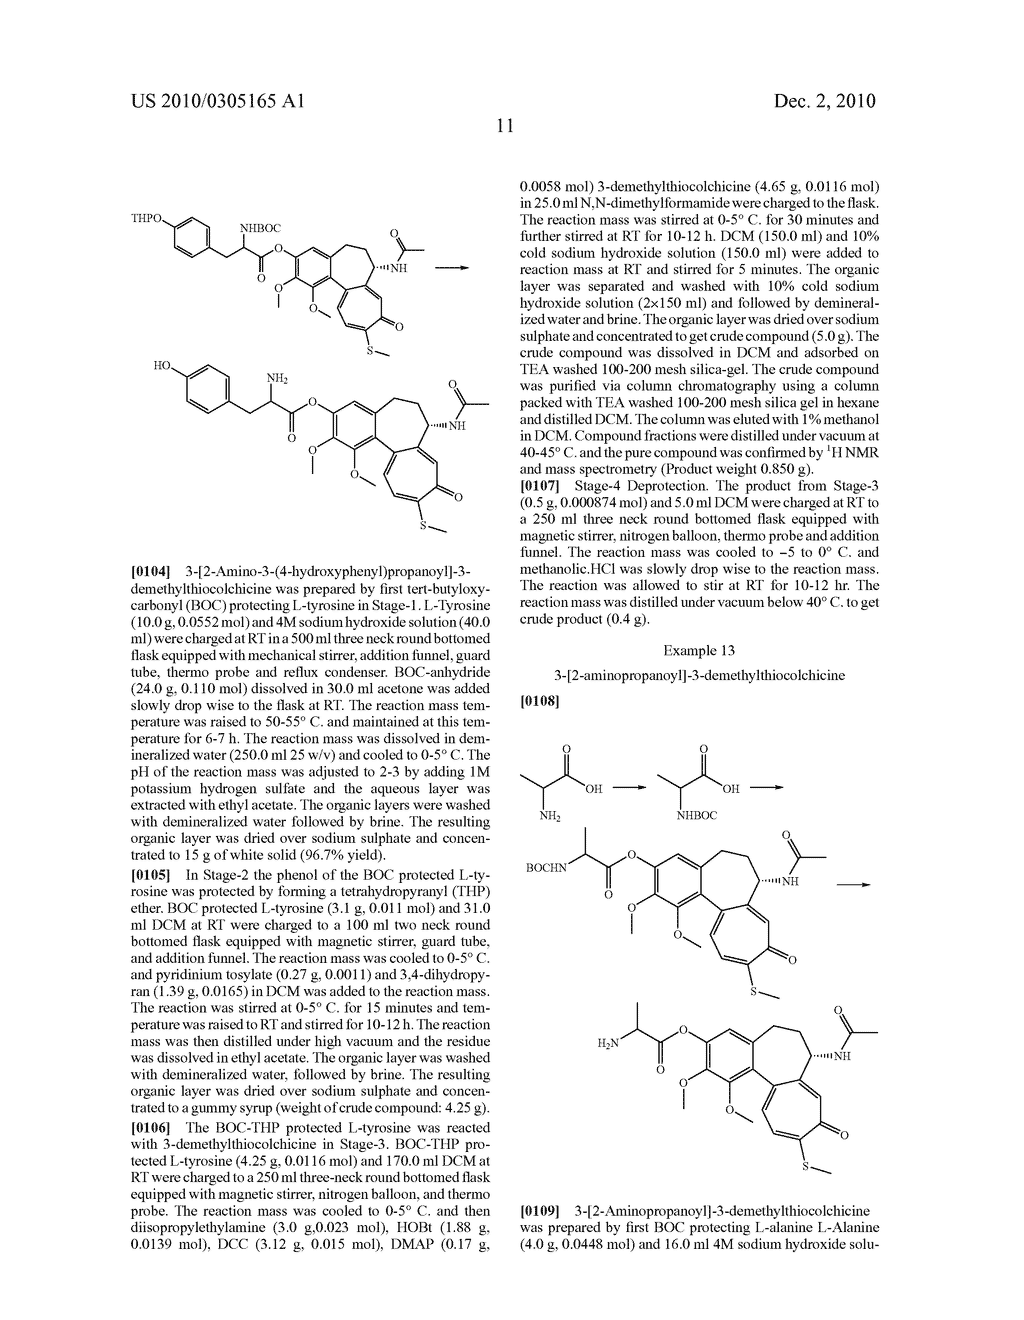 THIOCOLCHICINE DERIVATIVES, METHOD OF MAKING AND METHODS OF USE THEREOF - diagram, schematic, and image 12